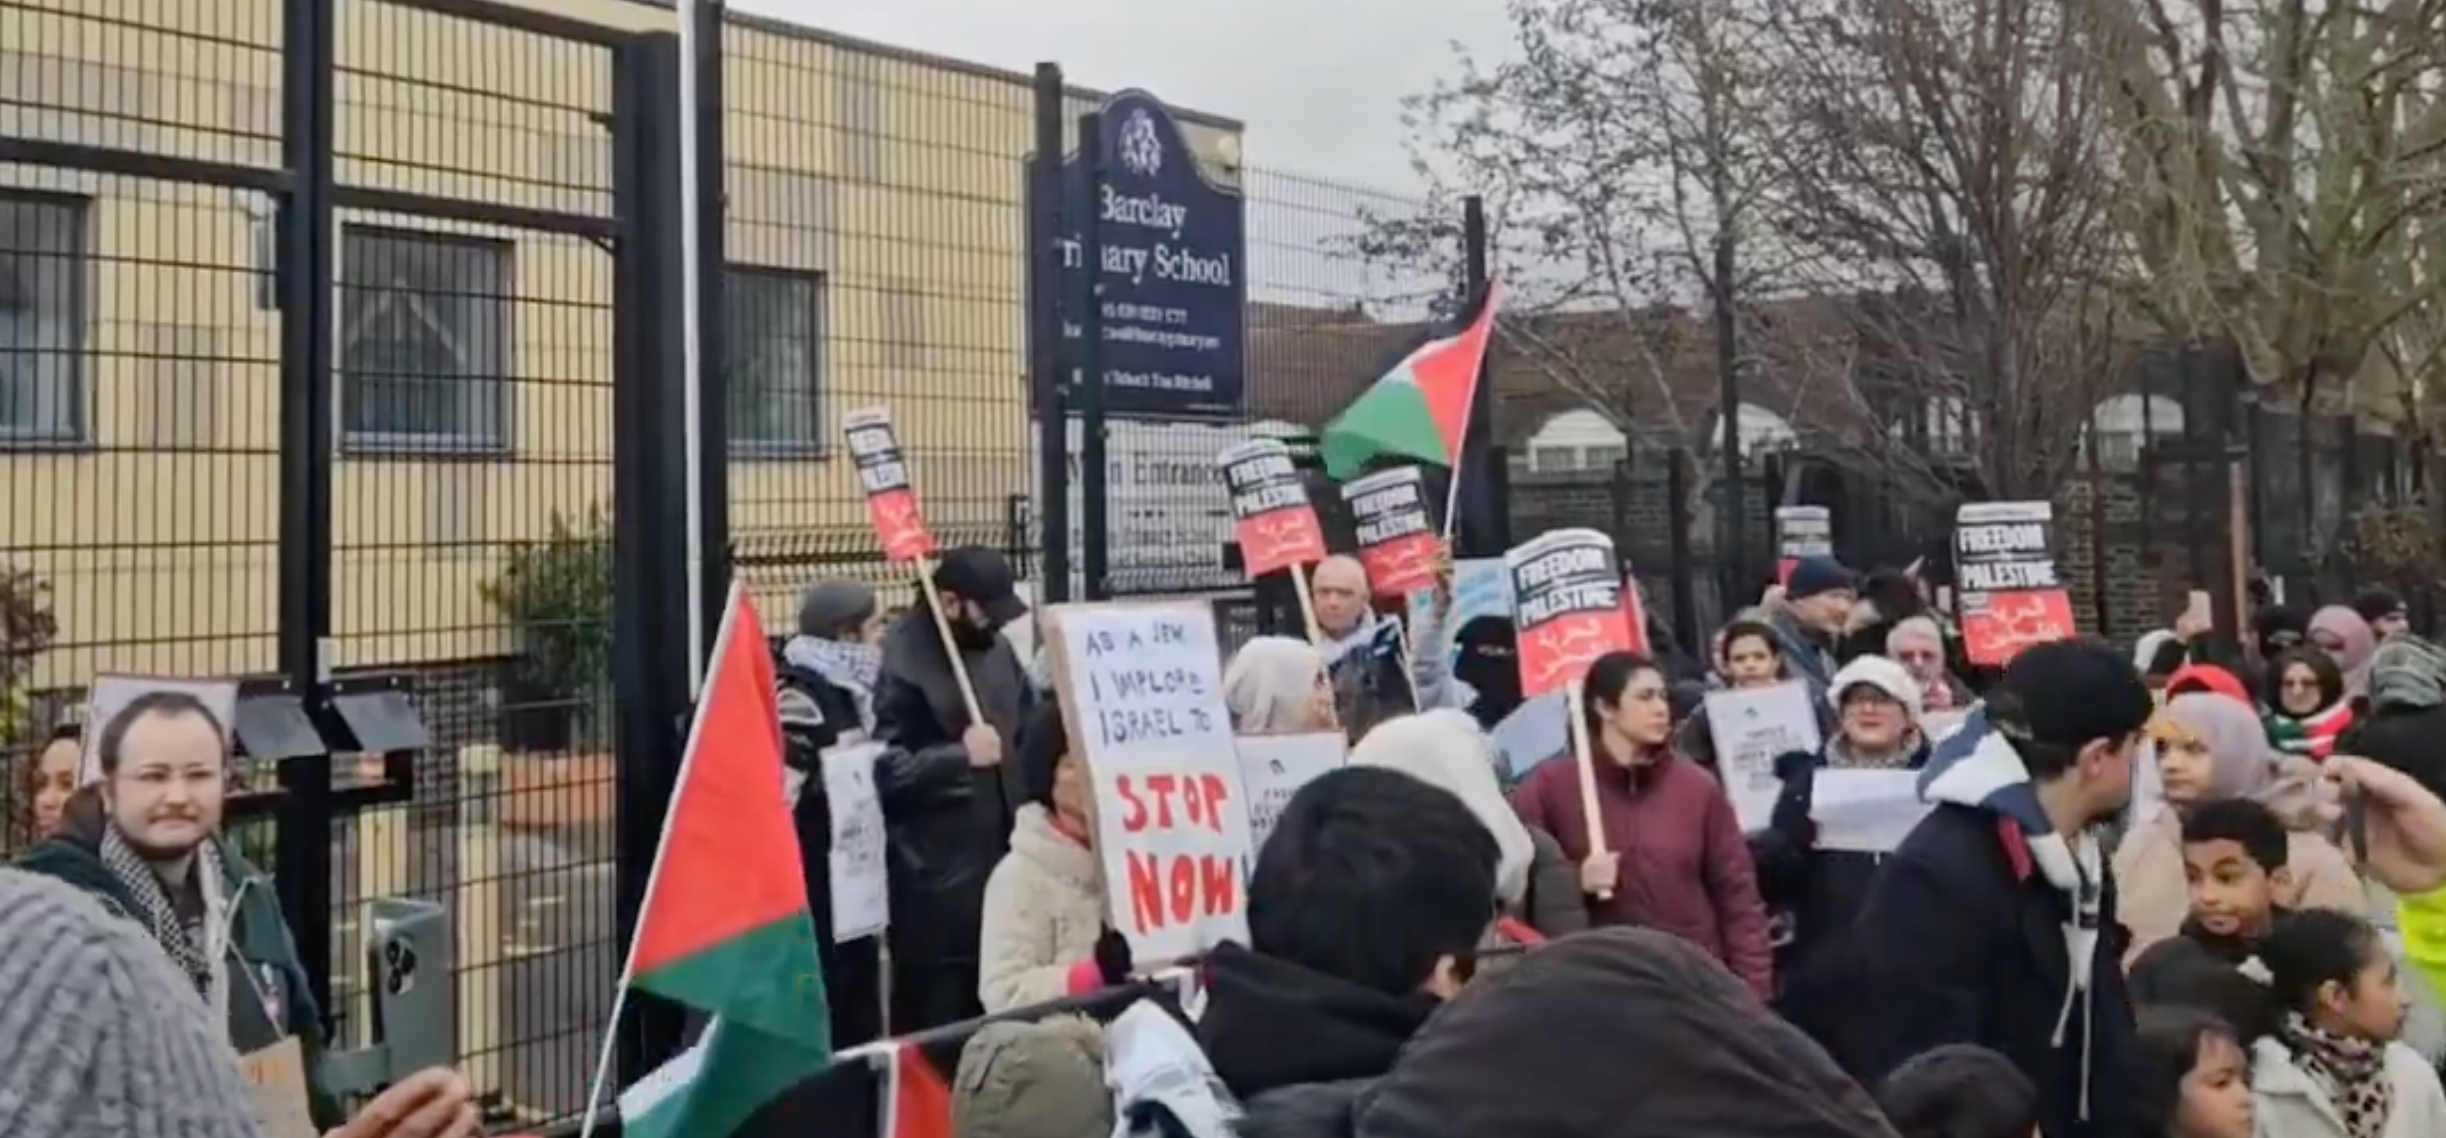 Crowds chanted ‘education is under attack’ as parents gathered with pro-Palestine placards and banners